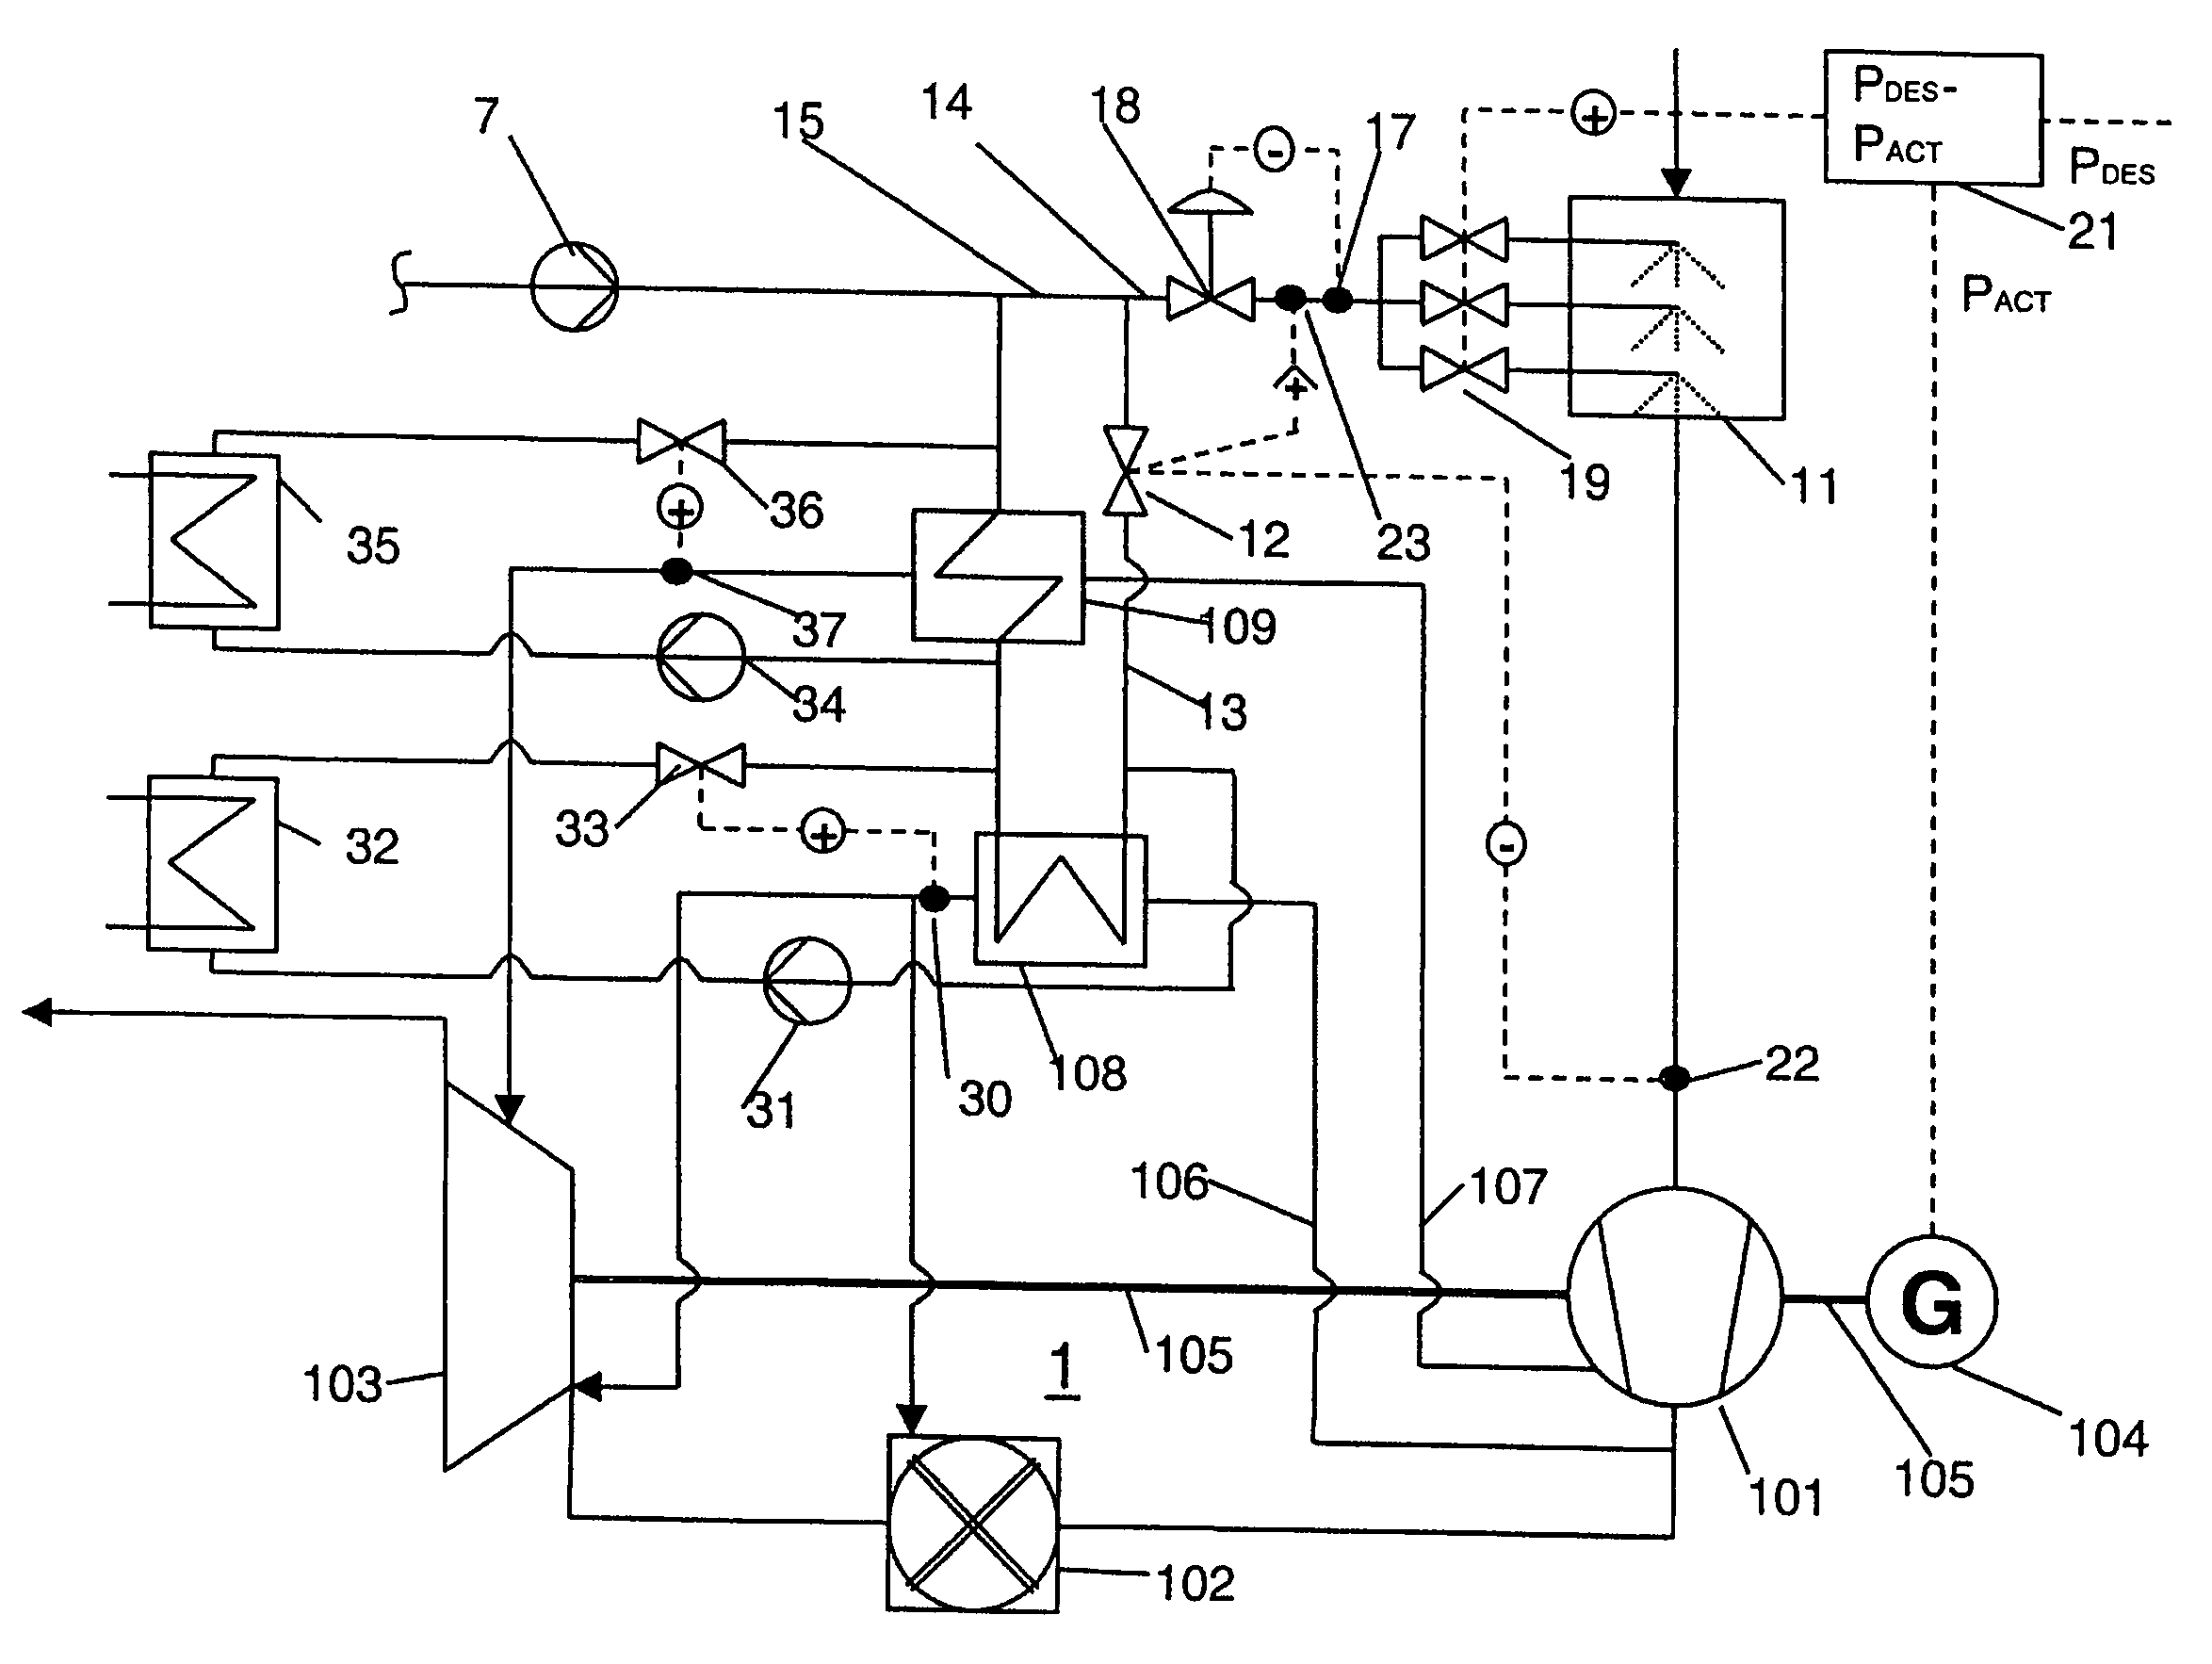 Method for operating a power plant